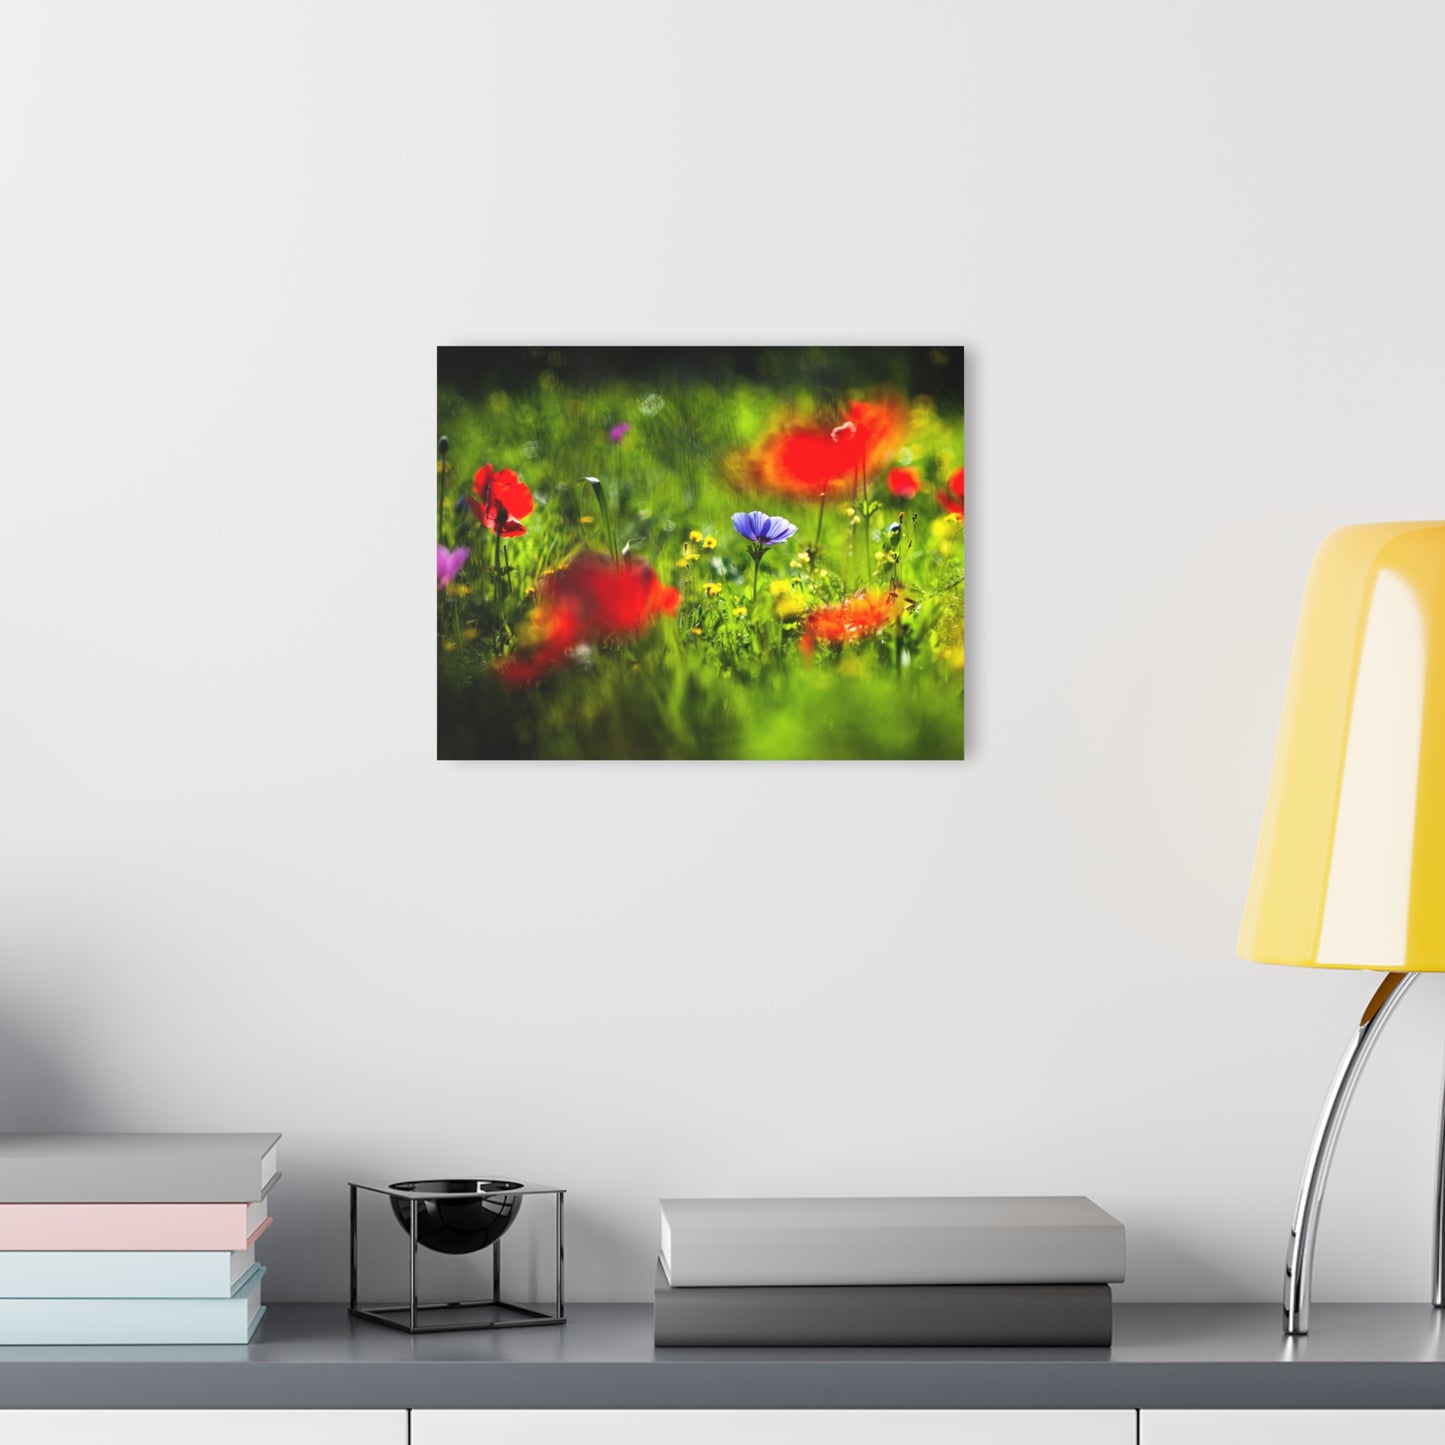 Elah Valley Wildflowers Yehoshua Halevi Photograph - Glossy Acrylic Print (French Cleat Hanging)